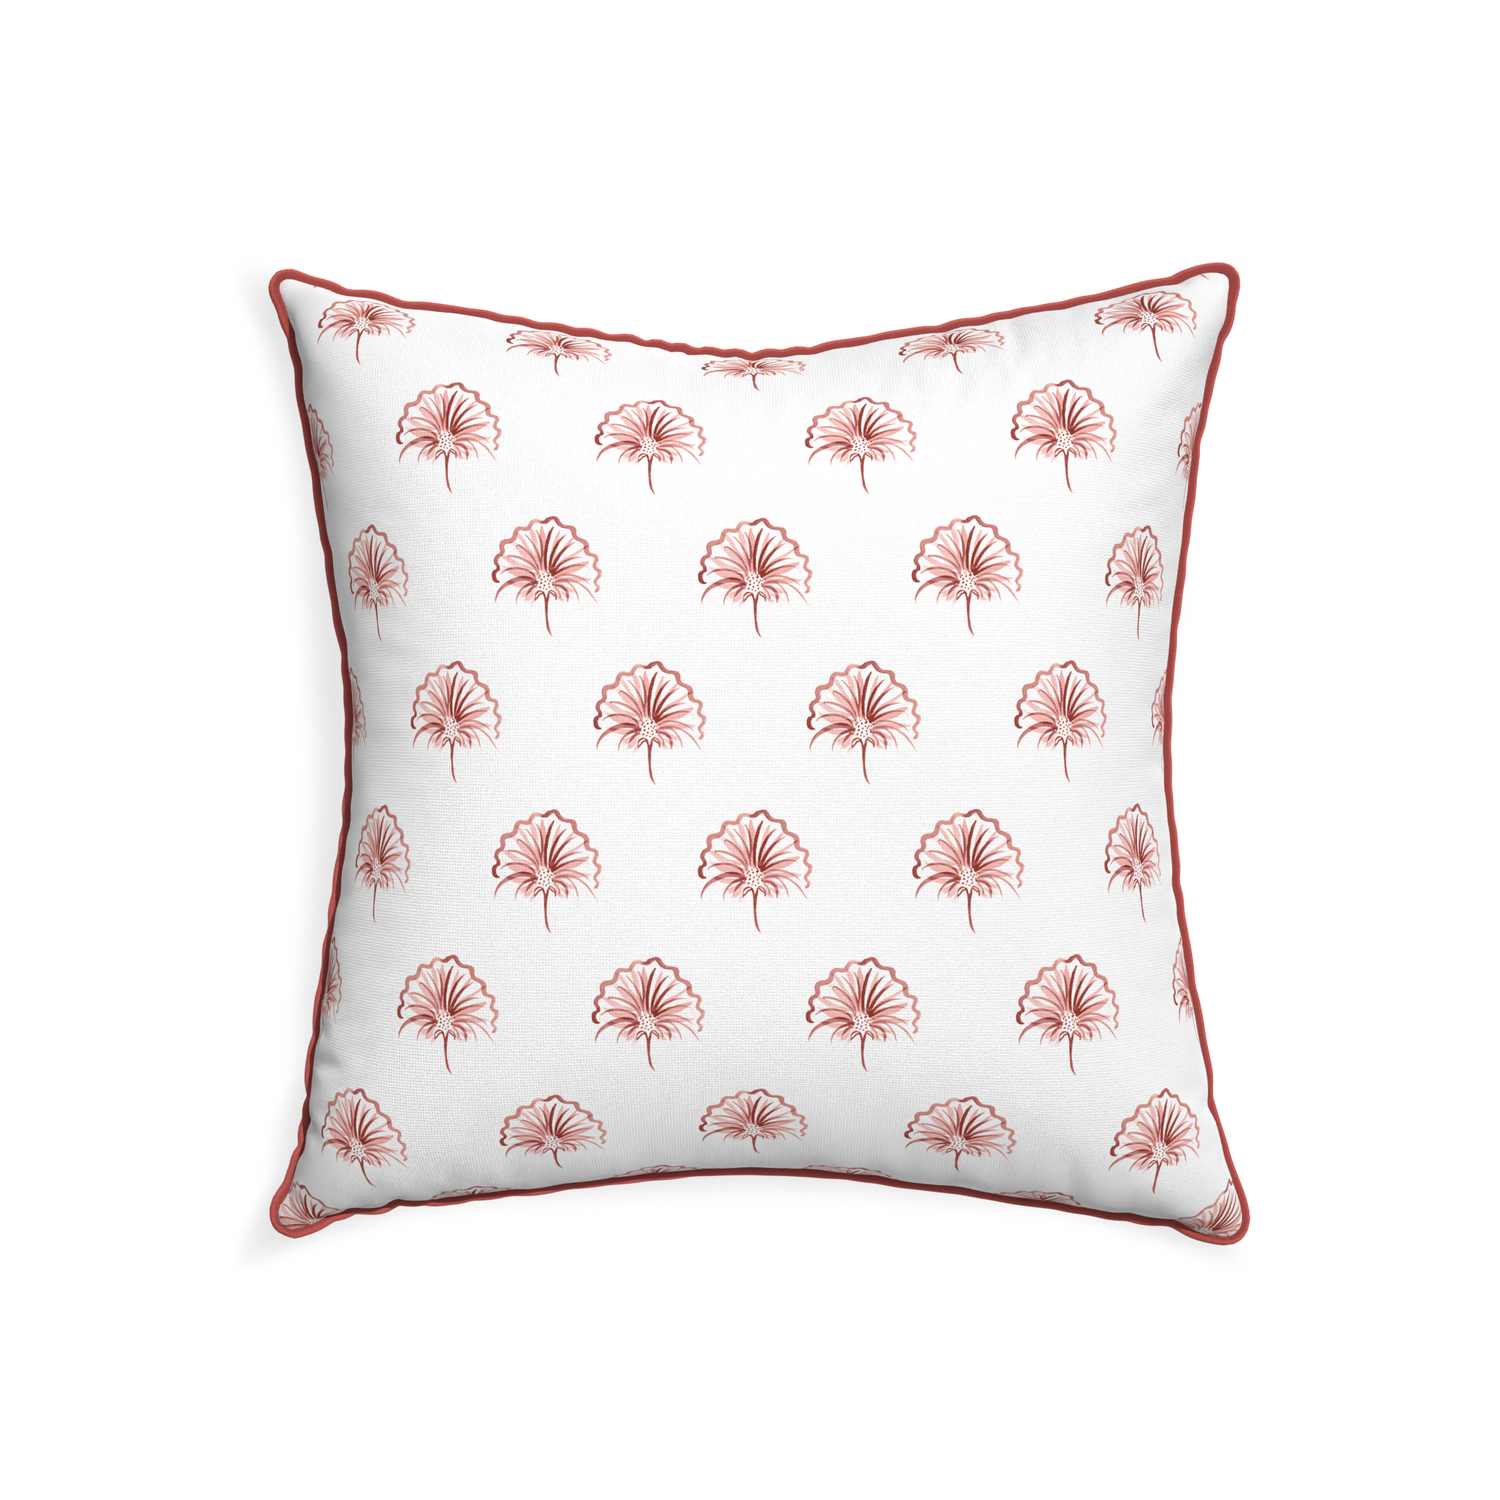 22-square penelope rose custom floral pinkpillow with c piping on white background